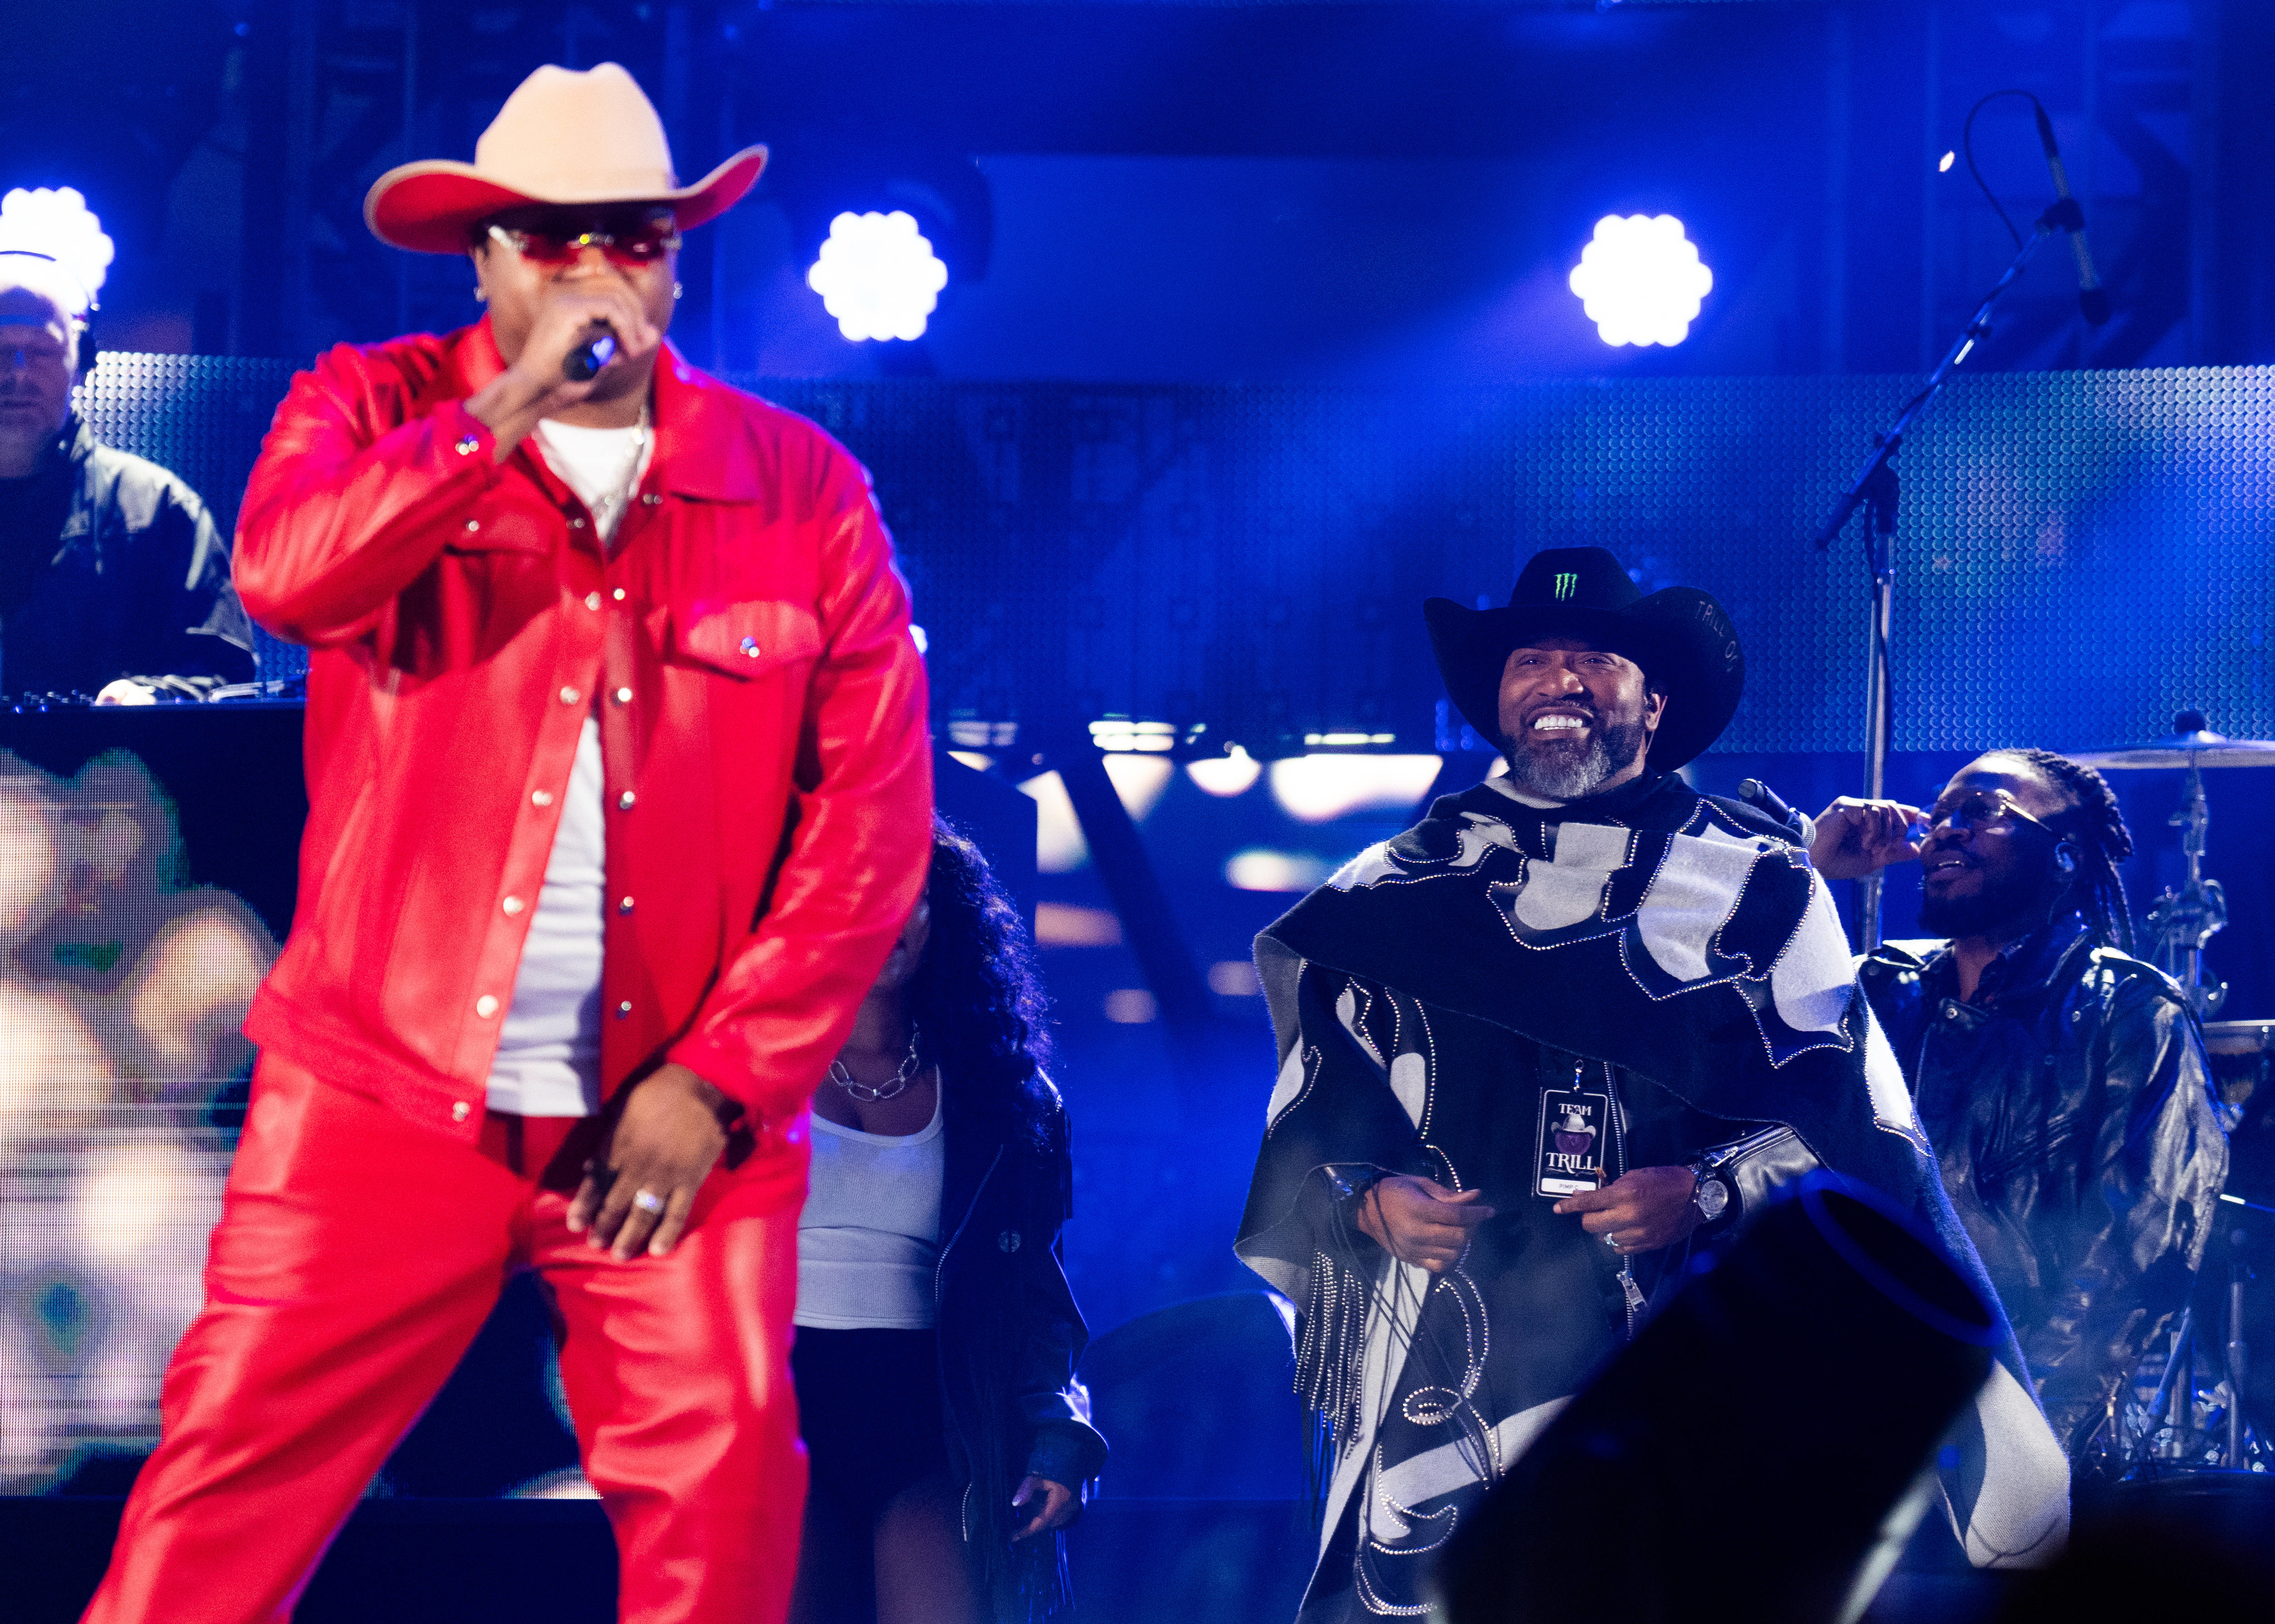 Two musicians in cowboy hats perform on stage; one in a red outfit with a microphone, the other in a black and white poncho